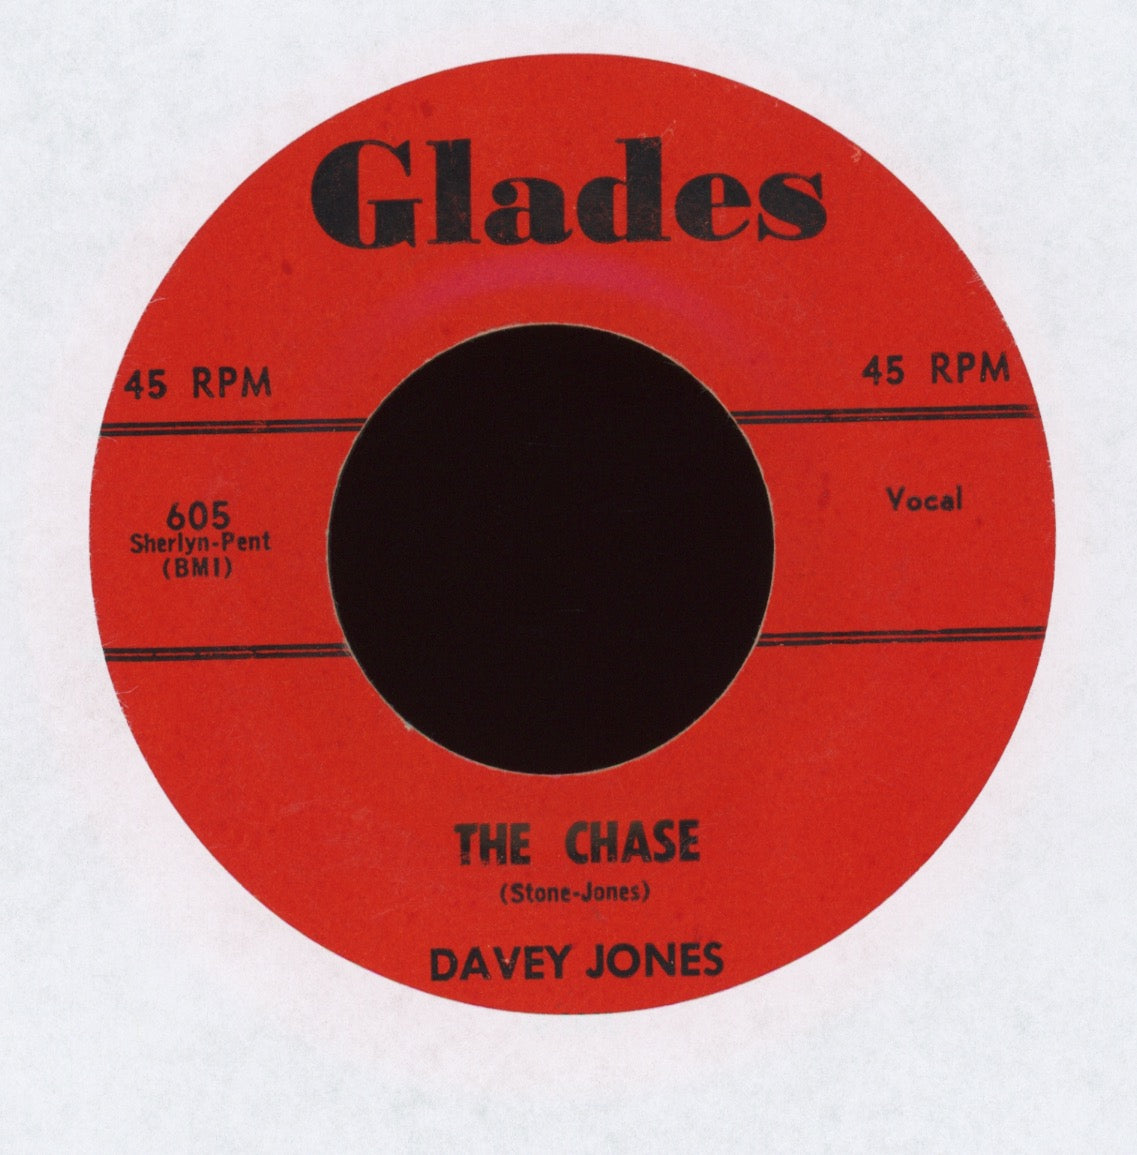 Davey Jones - The Chase on Glades